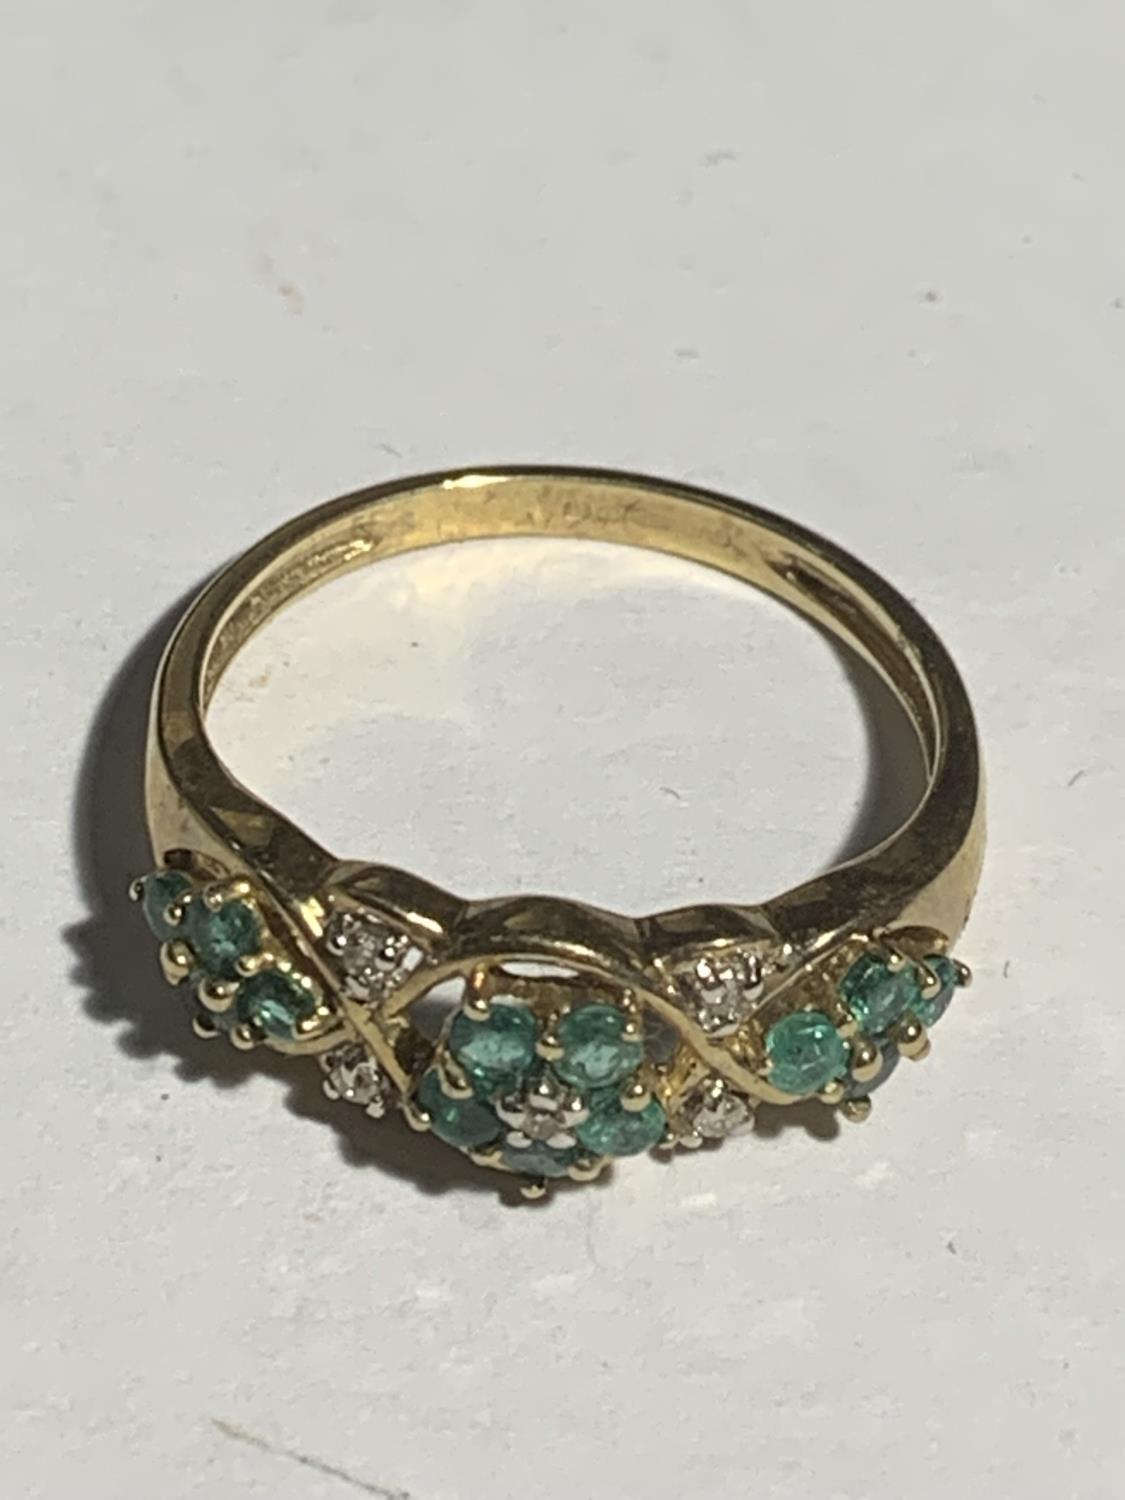 A 9 CARAT GOLD RING WITH GREEN AND CLEAR STONES IN A FLOWER DESIGN SIZE S GROSS WEIGHT 2.7 GRAMS - Image 5 of 5